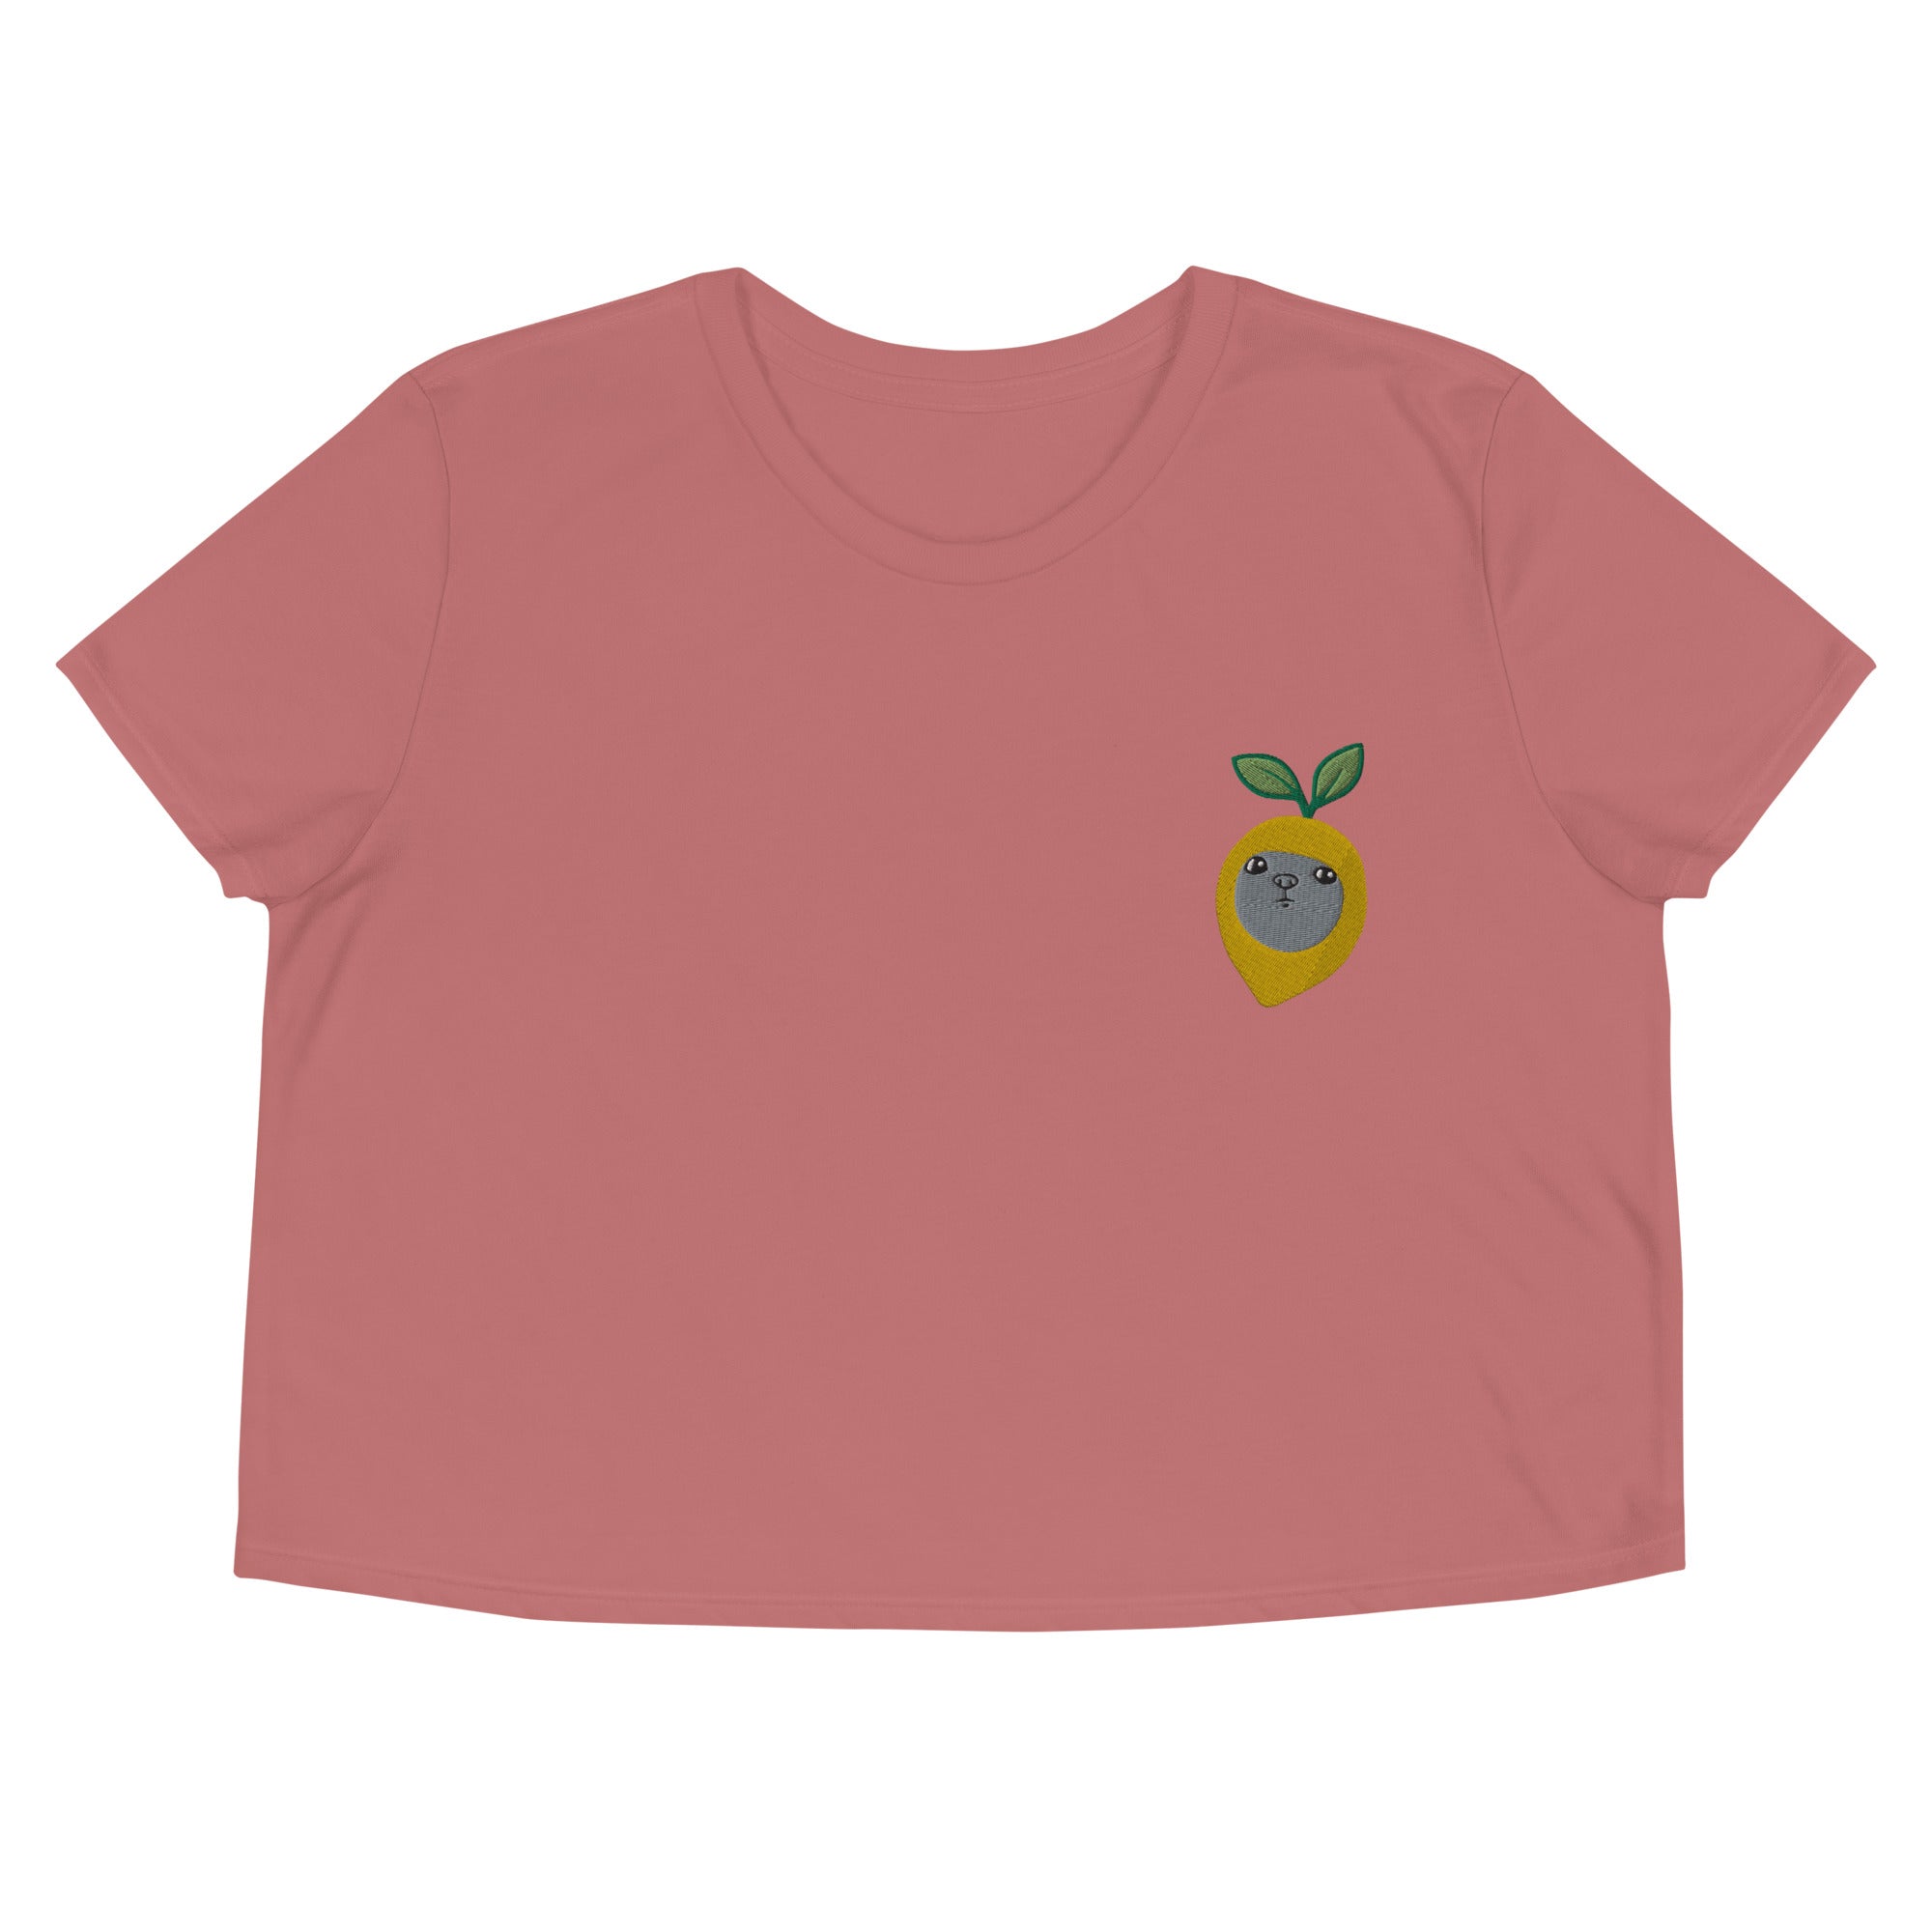 Angry Lemon Embroidered Adult Women's Crop Tee